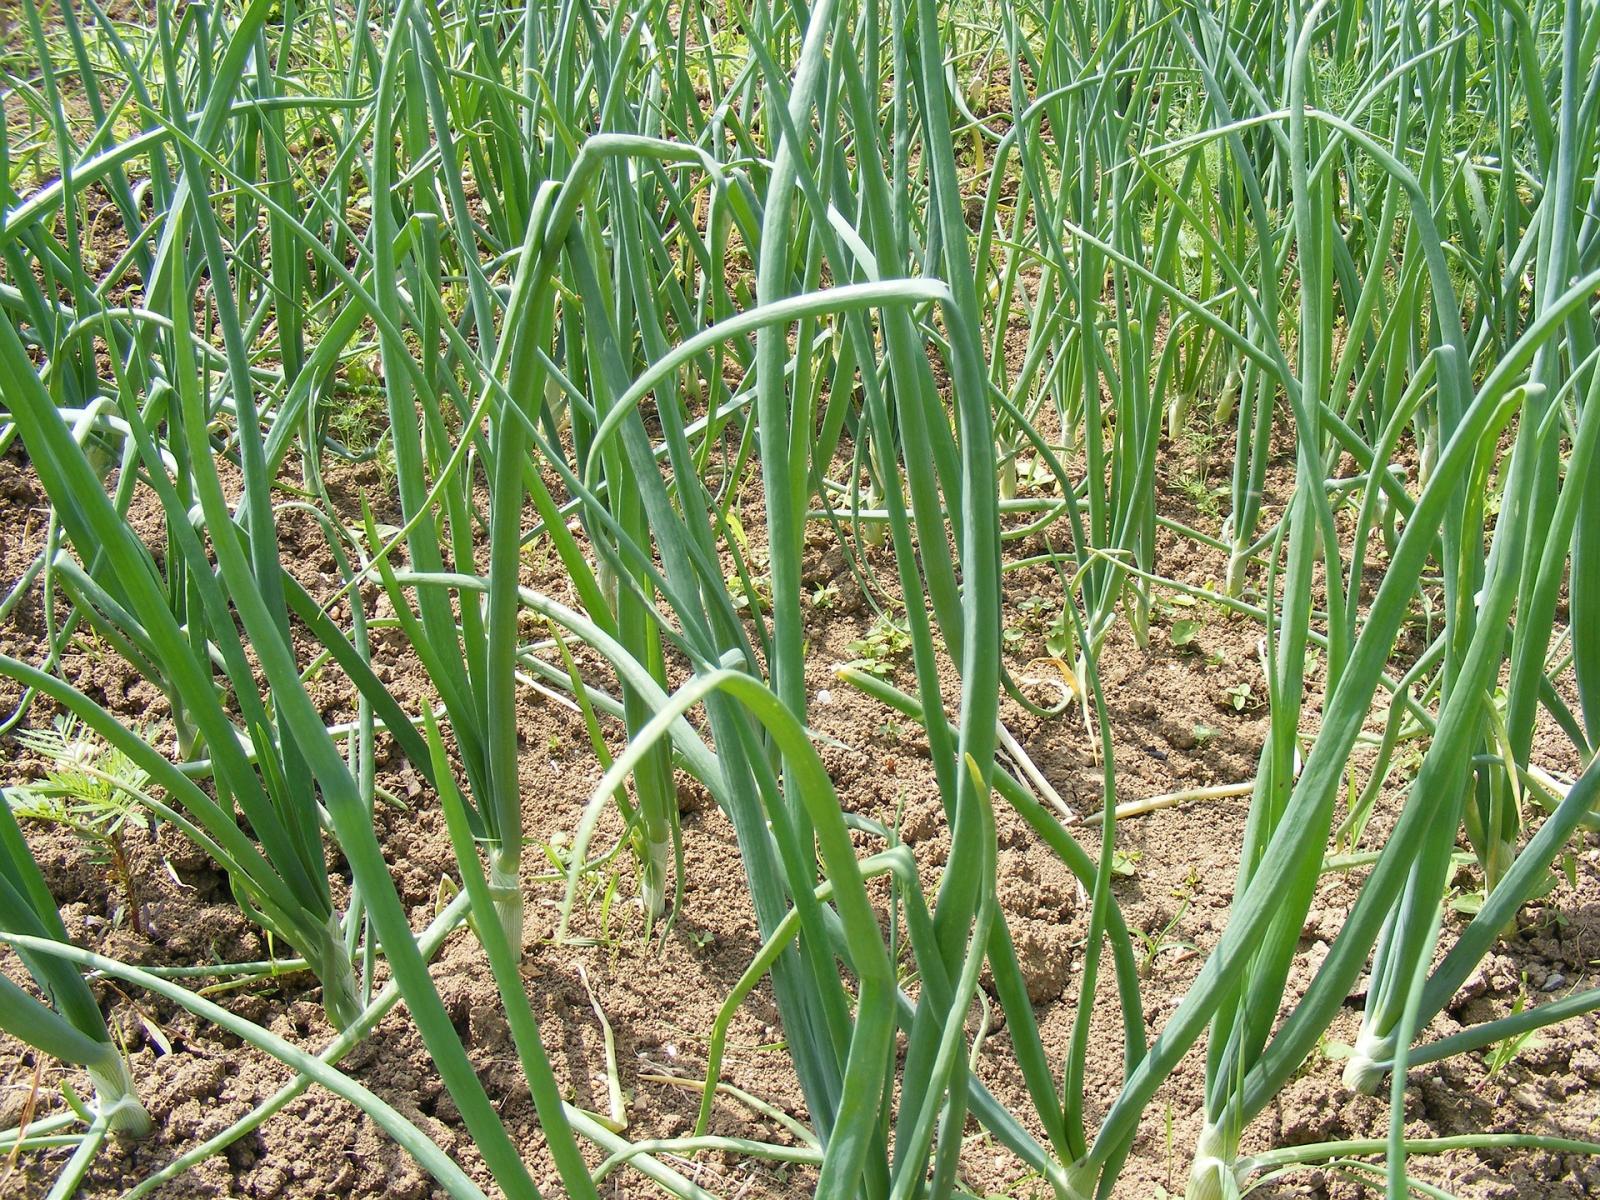 Image of onions in the home vegetable garden. 